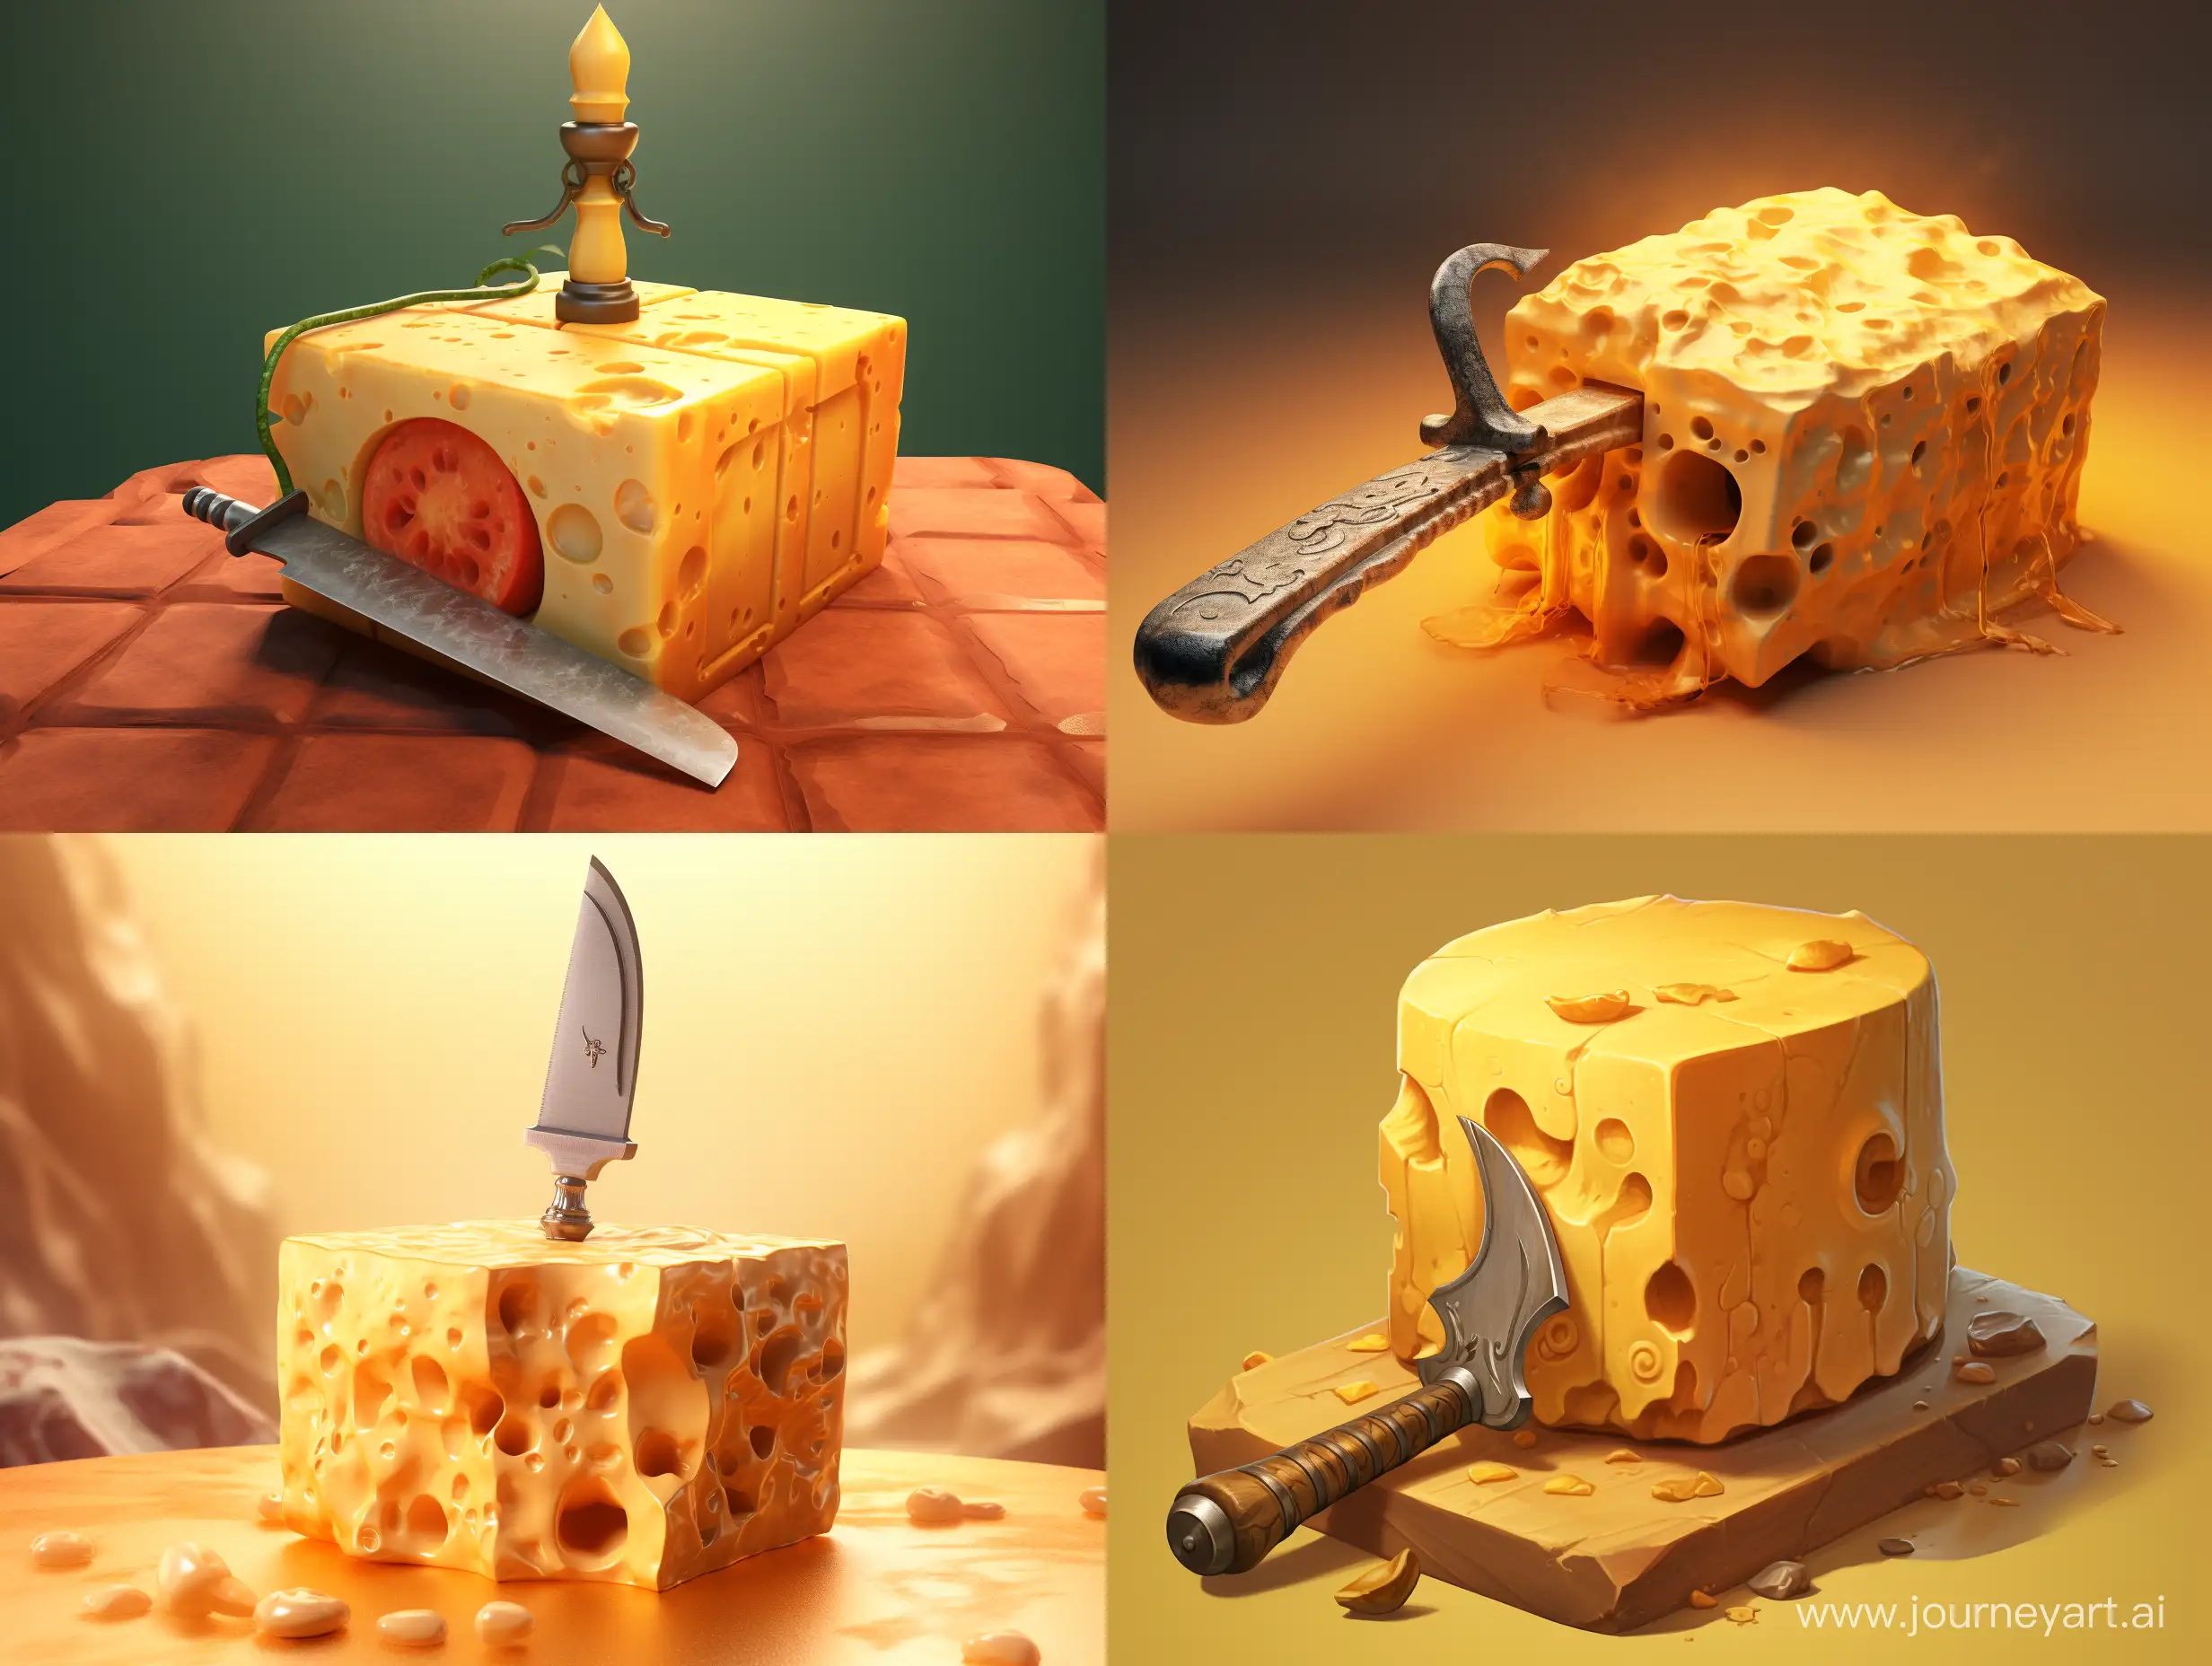 Artistic-Cheese-Block-with-Sword-Culinary-Creativity-in-43-Aspect-Ratio